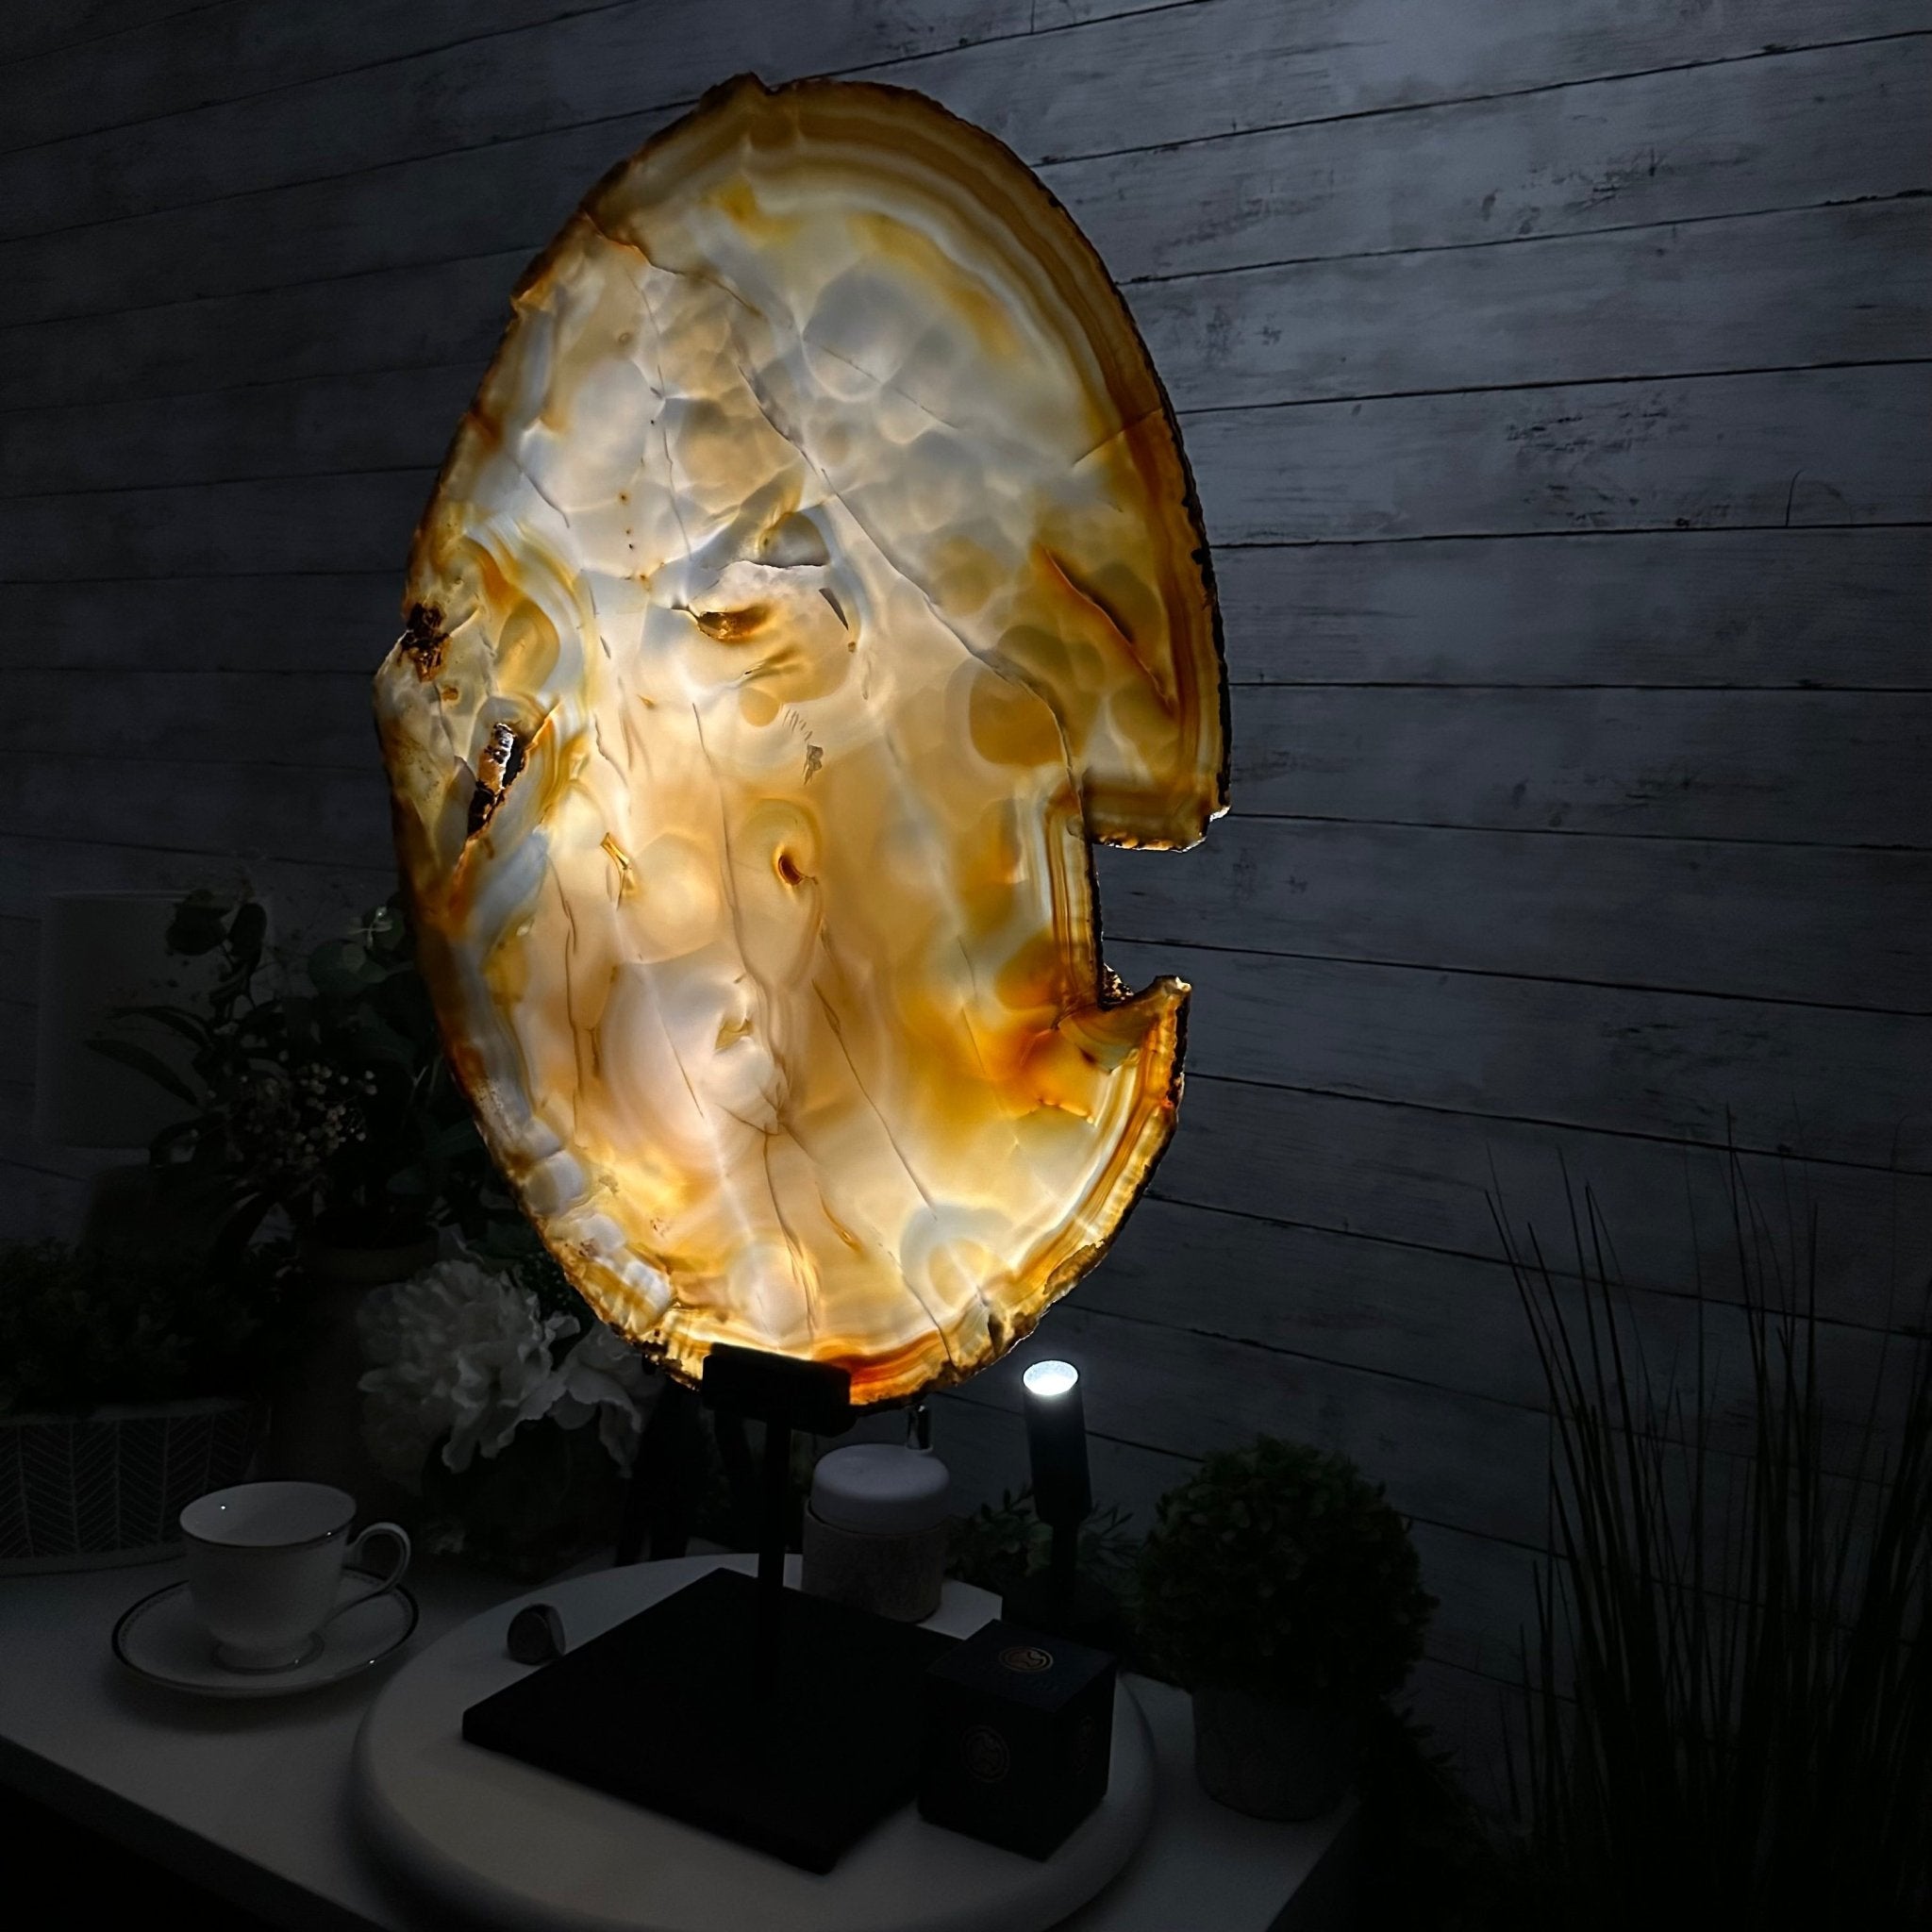 Special Large Natural Brazilian Agate Slice on a Metal Stand, 29.5" Tall #5056-0045 - Brazil GemsBrazil GemsSpecial Large Natural Brazilian Agate Slice on a Metal Stand, 29.5" Tall #5056-0045Slices on Fixed Bases5056-0045